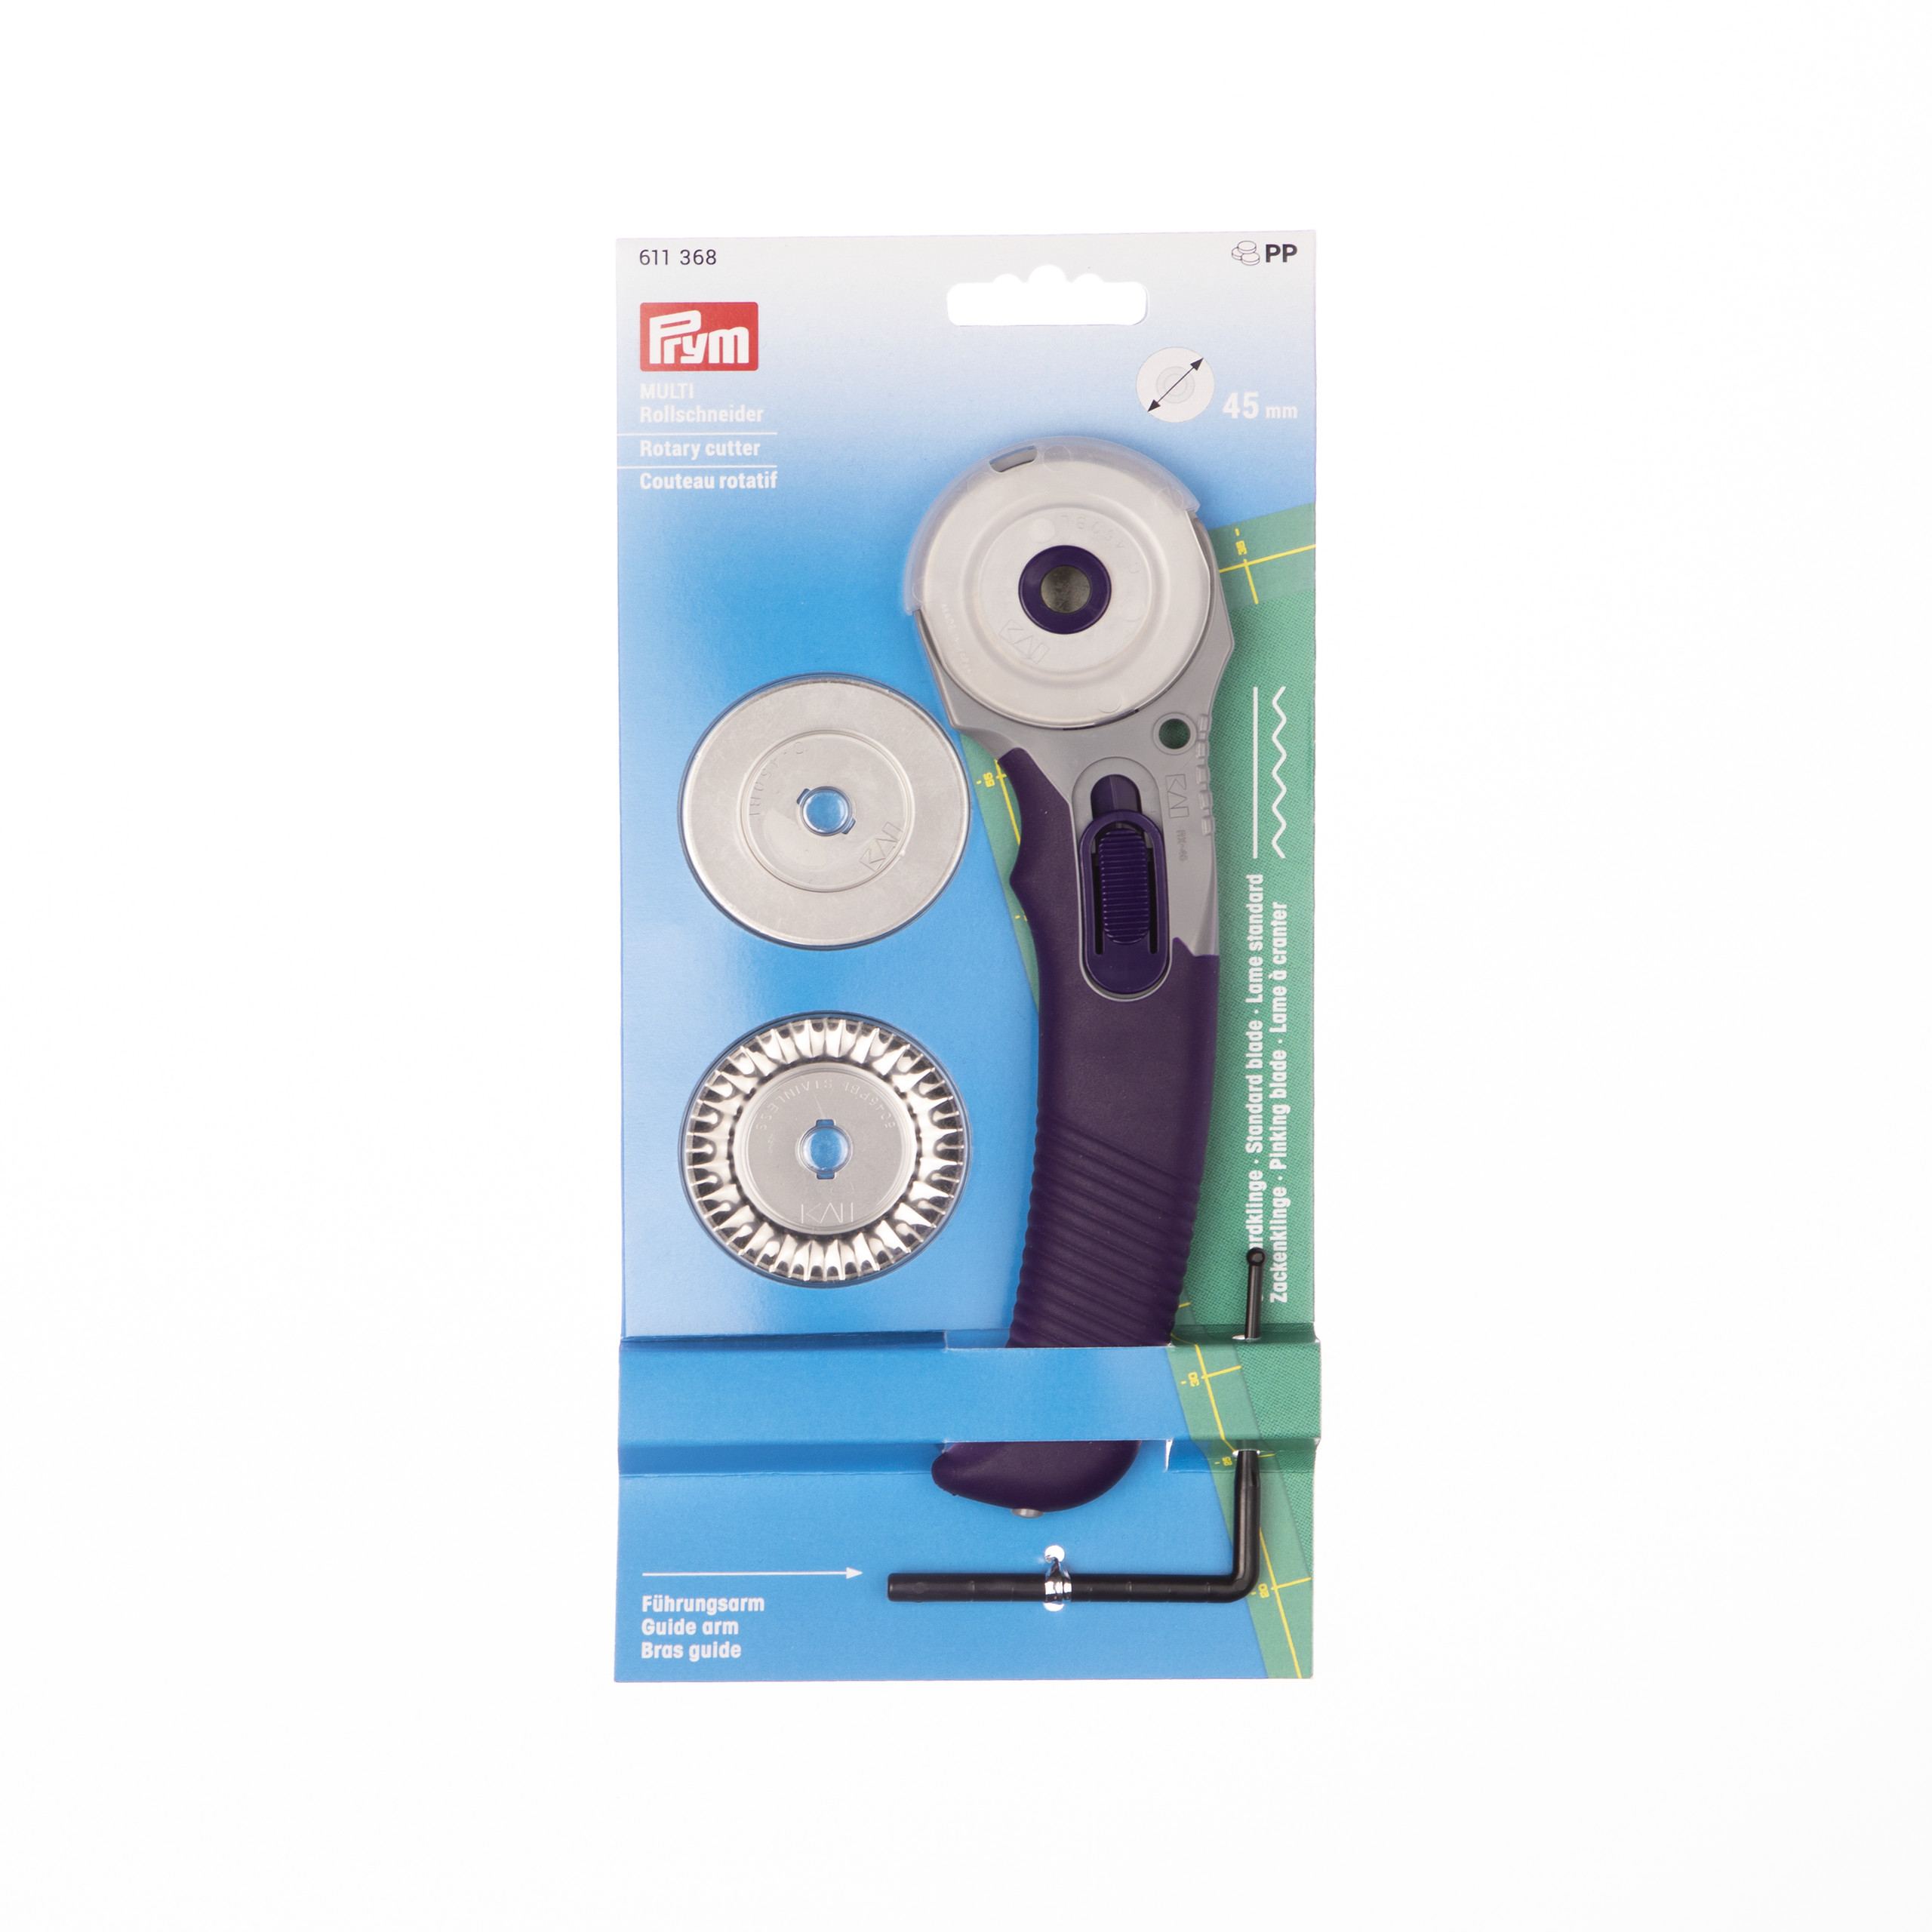 Wave blade for Multi-purpose rotary cutter + 3 Blades, 1 St